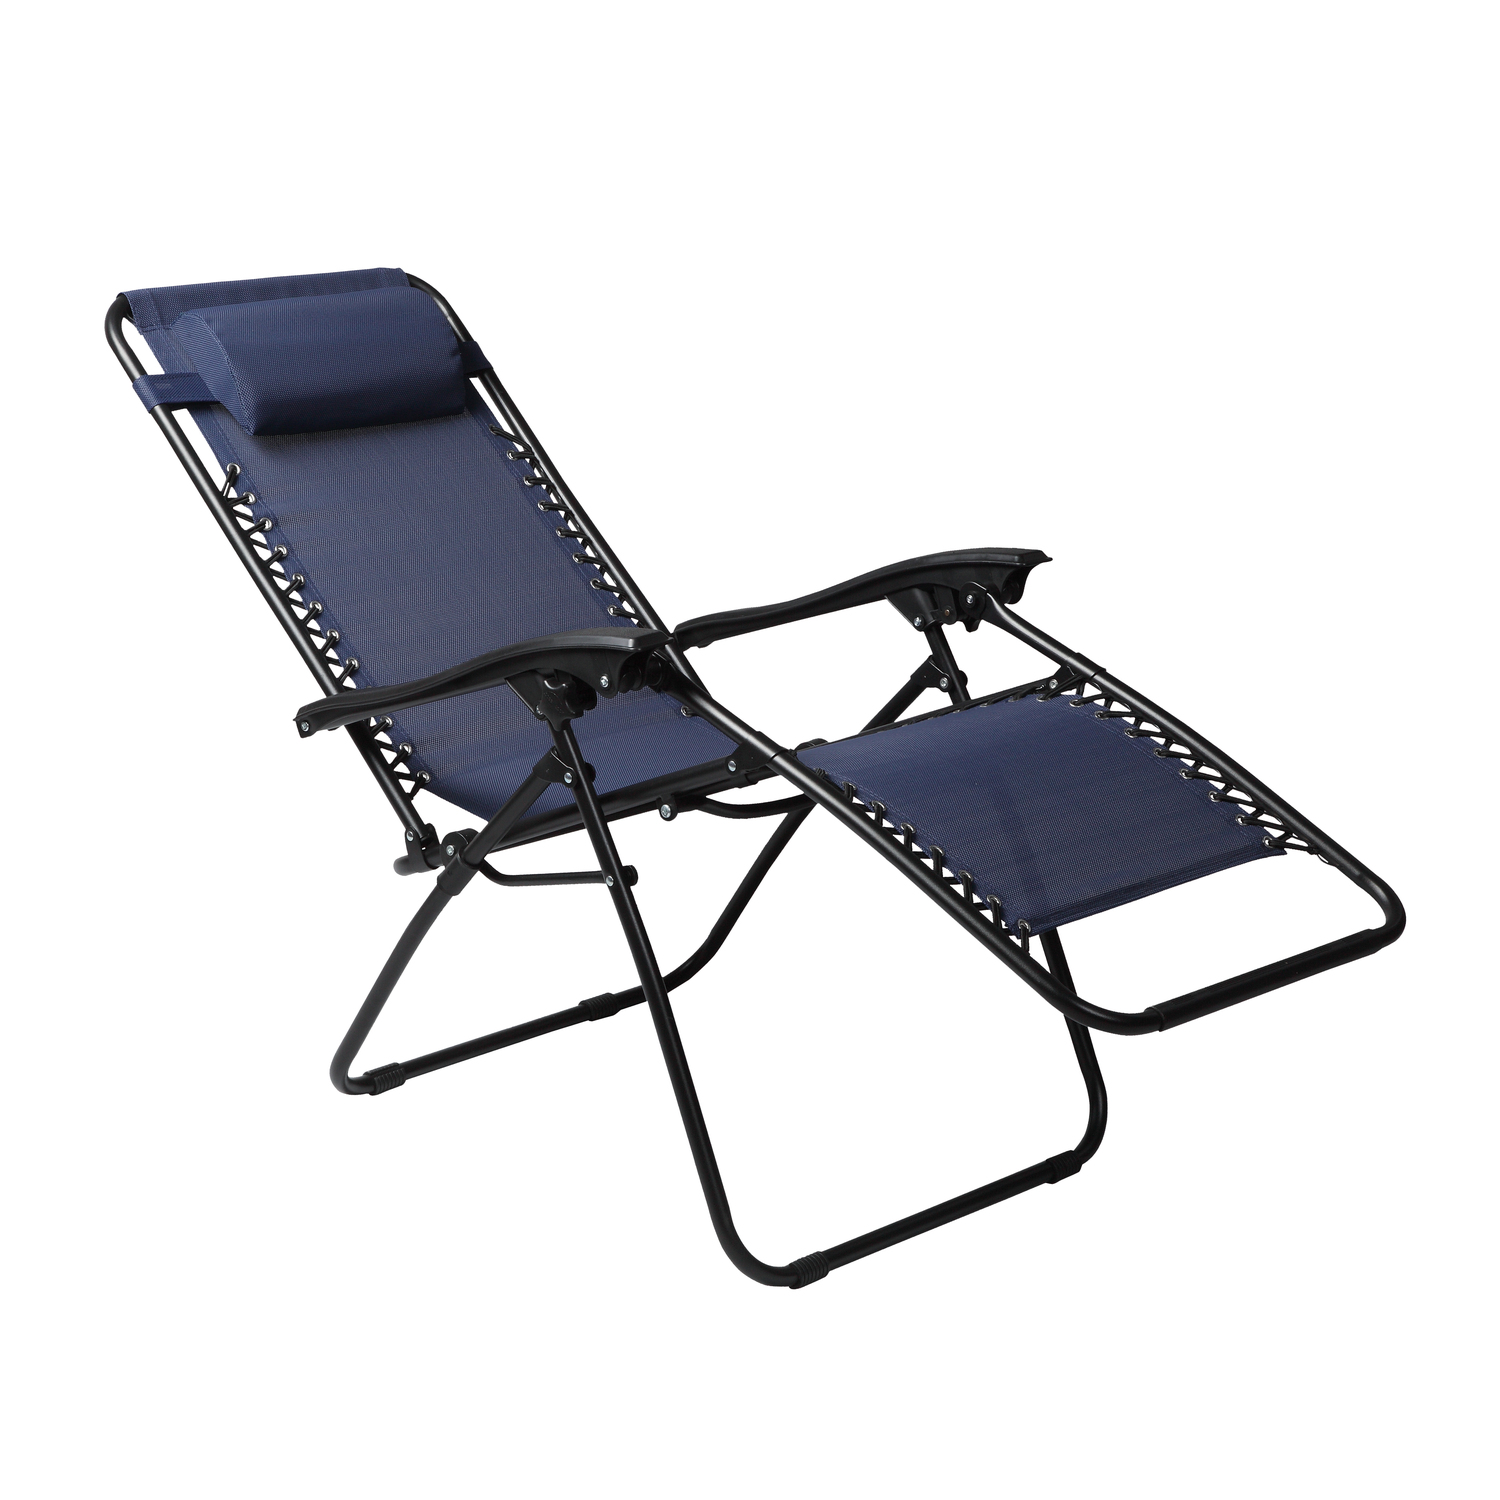 Zero Gravity Chairs Set of 4 Pool Lounge Chair Zero Gravity Recliner Lawn Patio Outdoor Porch Beach Backyard Anti Gravity Chair Folding Reclining Camping Chair, Blue - image 3 of 8